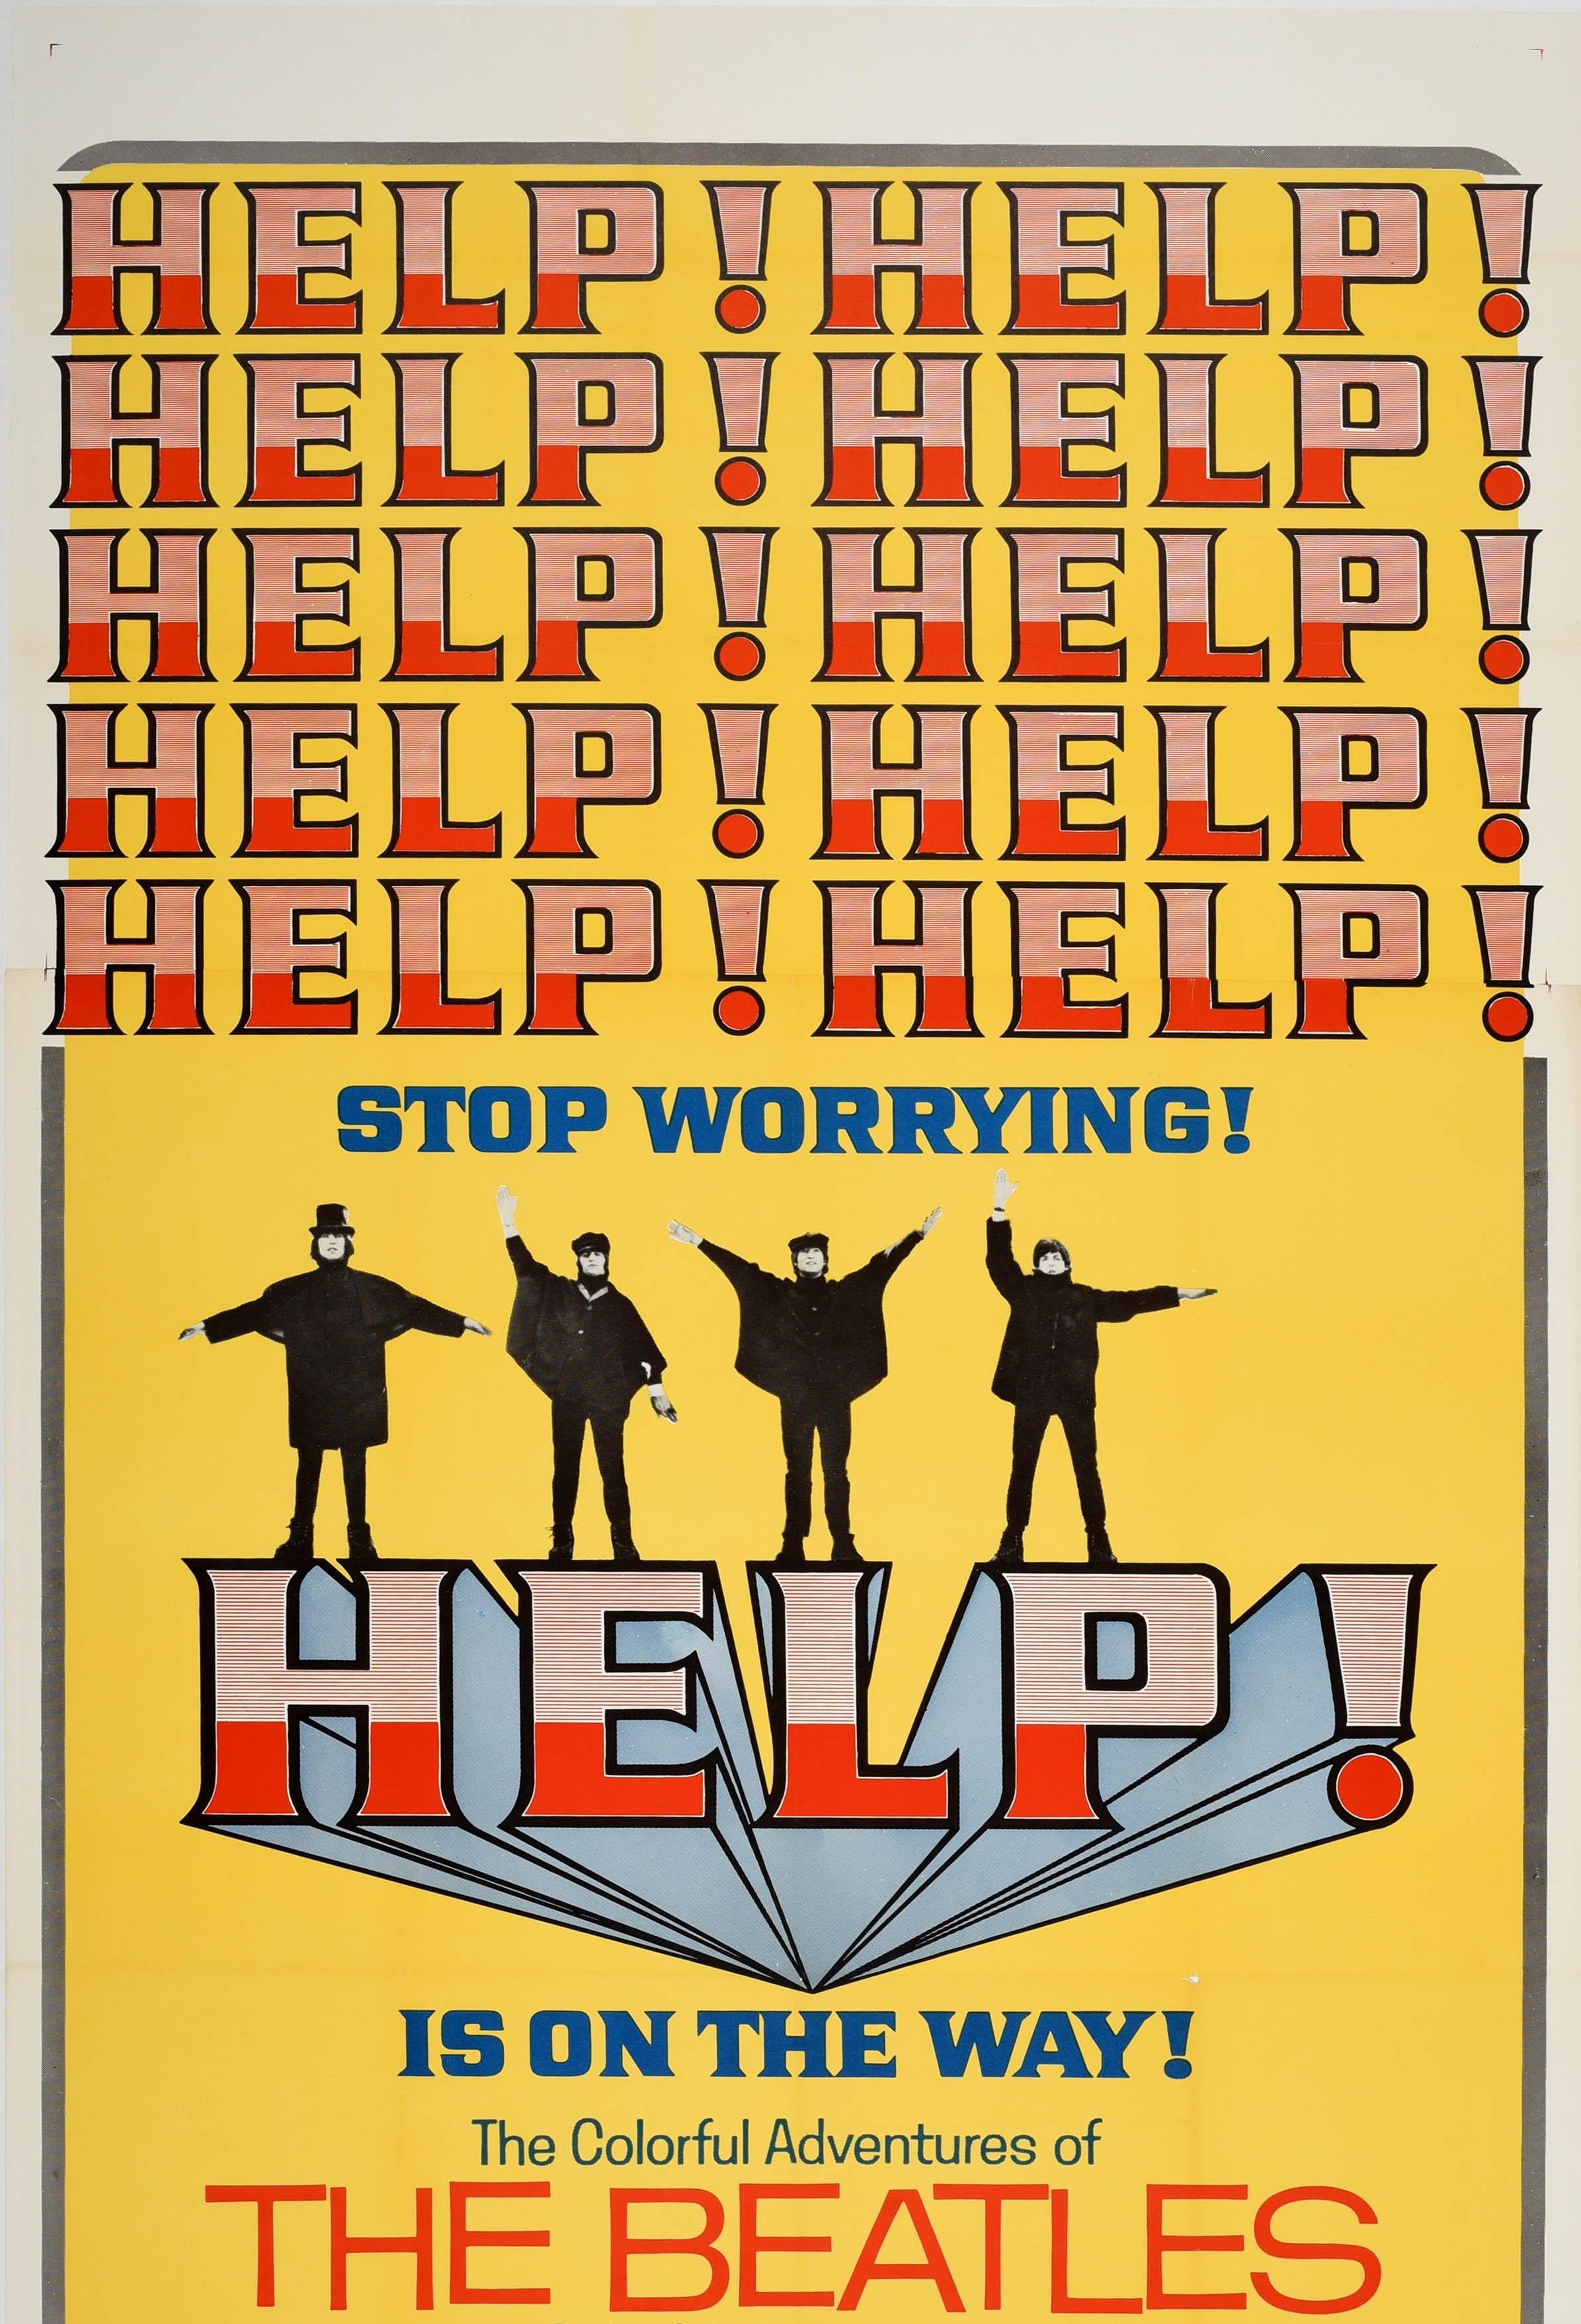 Original vintage movie poster for a Beatles film - Help! Help! Stop Worrying! Help! Is on the way! The colorful adventures of the Beatles Help yourself to seven great new Beatle hits! - featuring the bold stylised lettering against a yellow